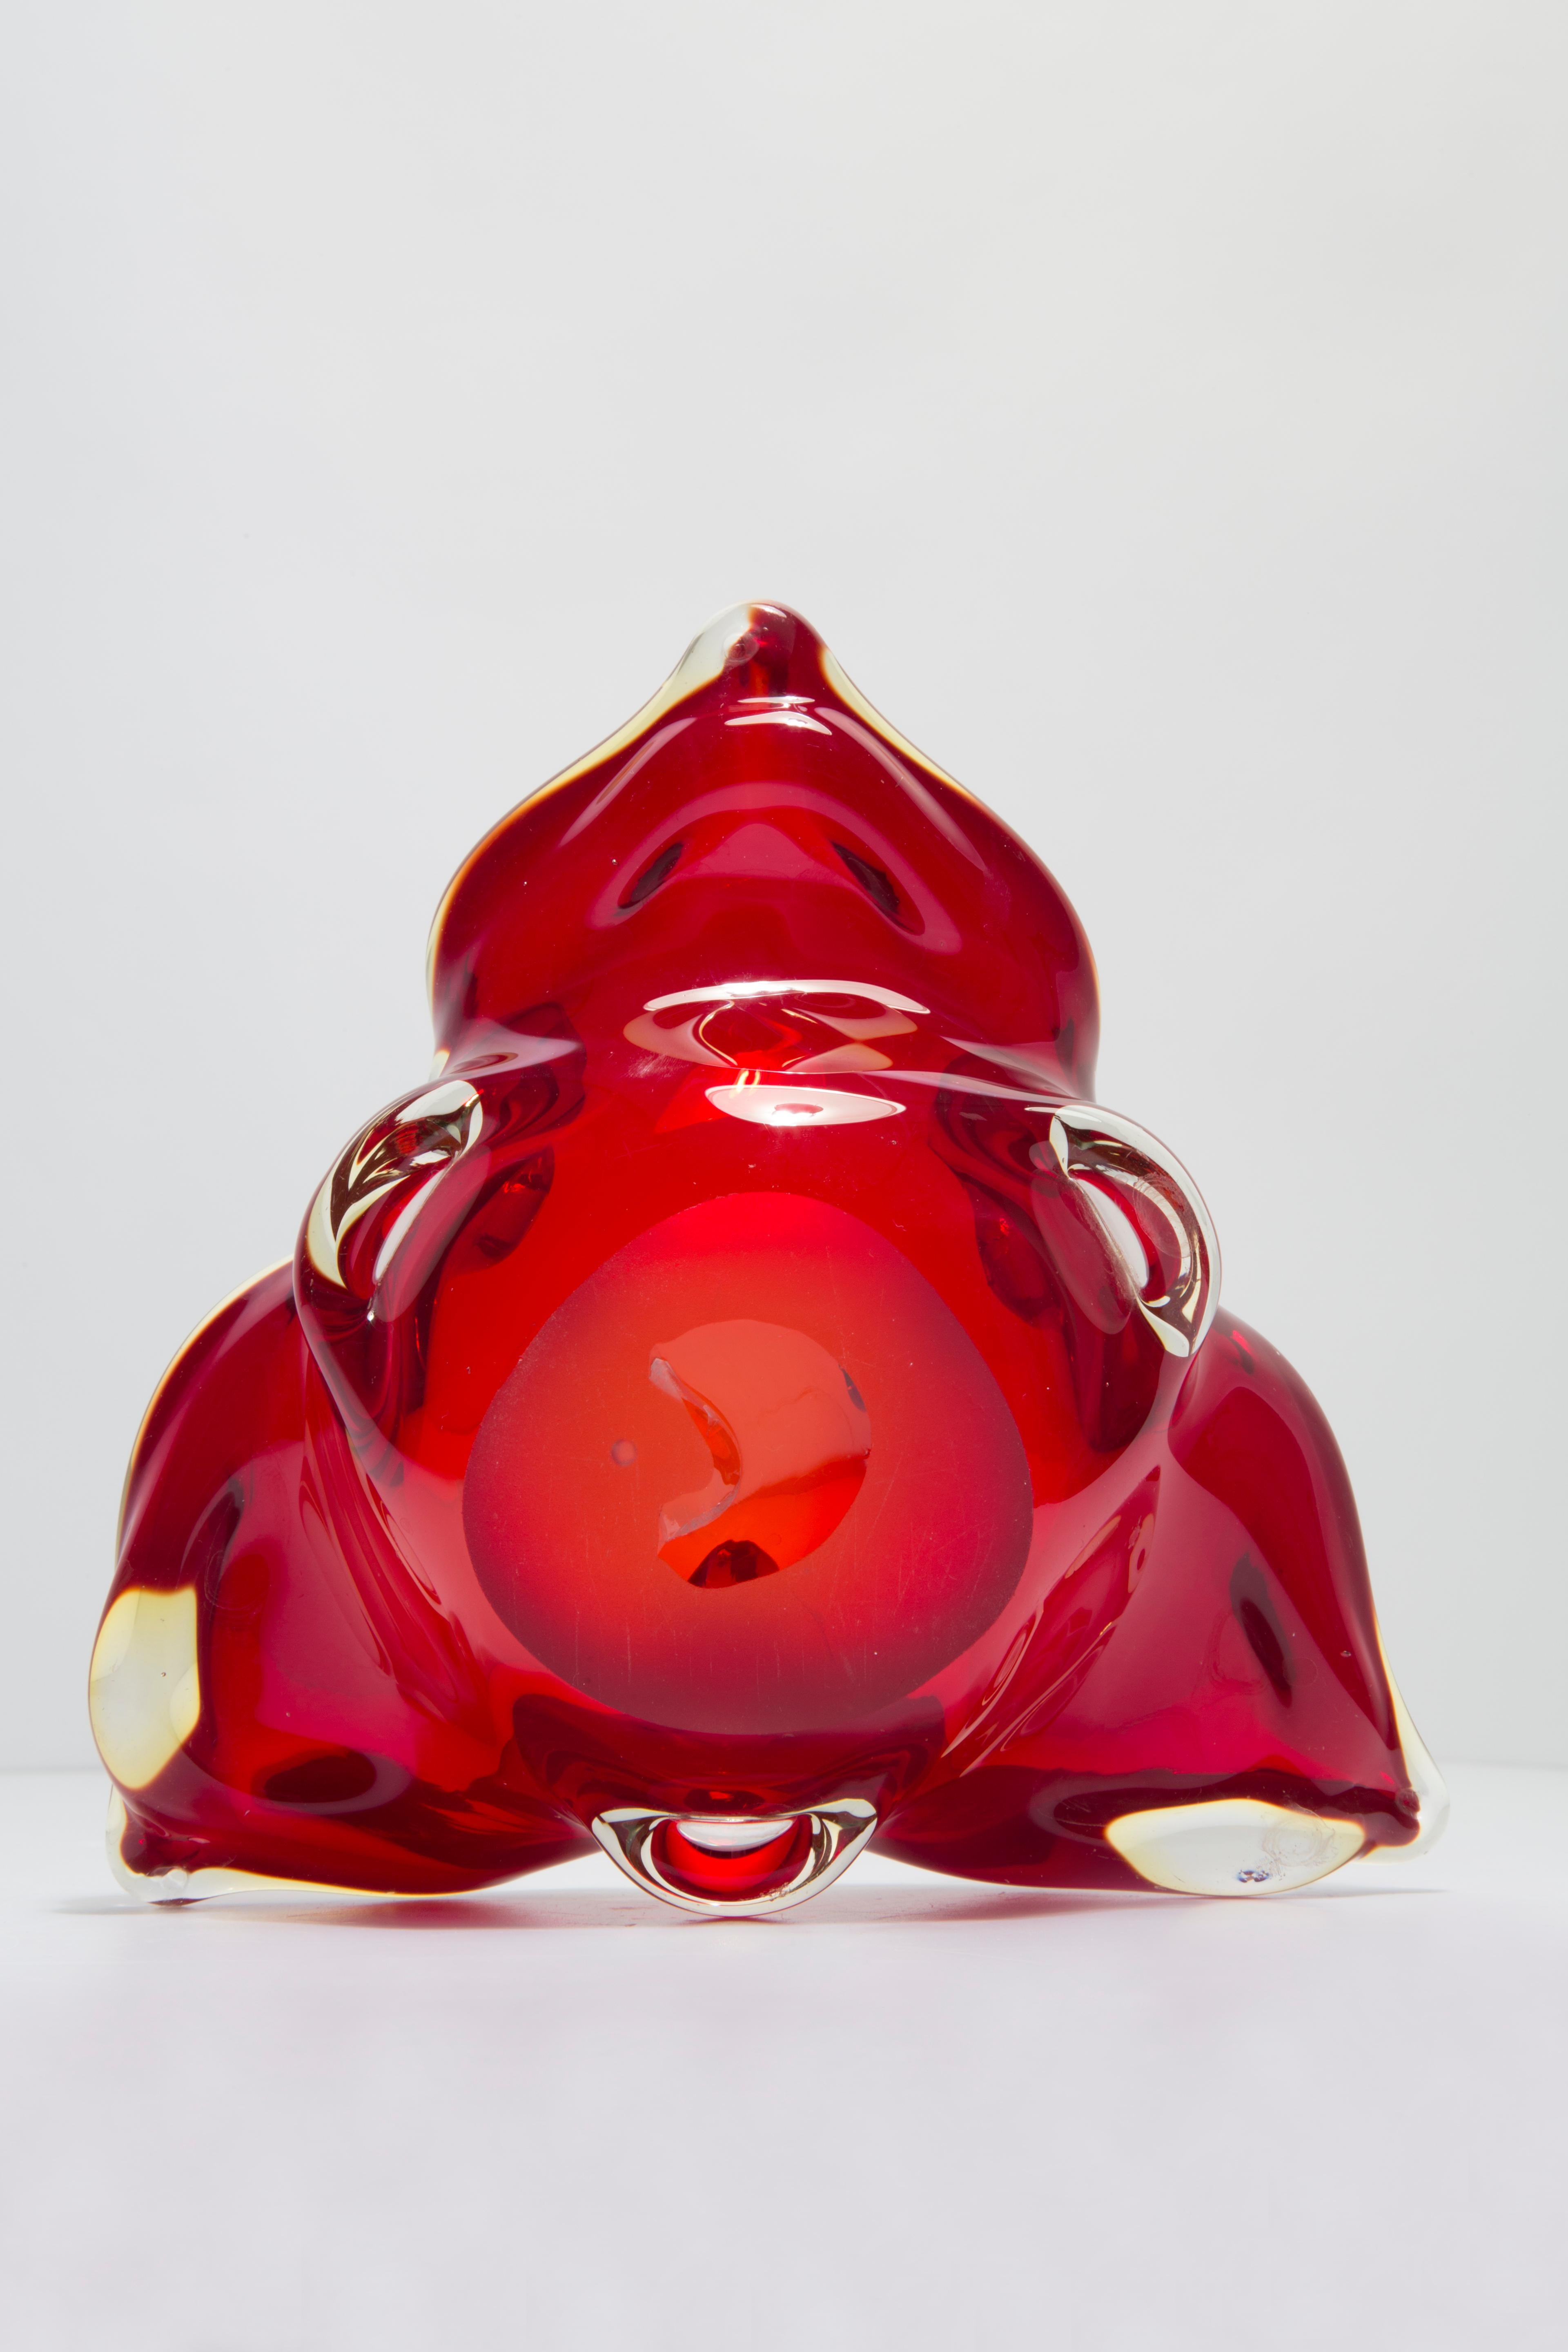 Mid Century Crystal Red Artistic Glass Ashtray Bowl, Italy, 1970s For Sale 5